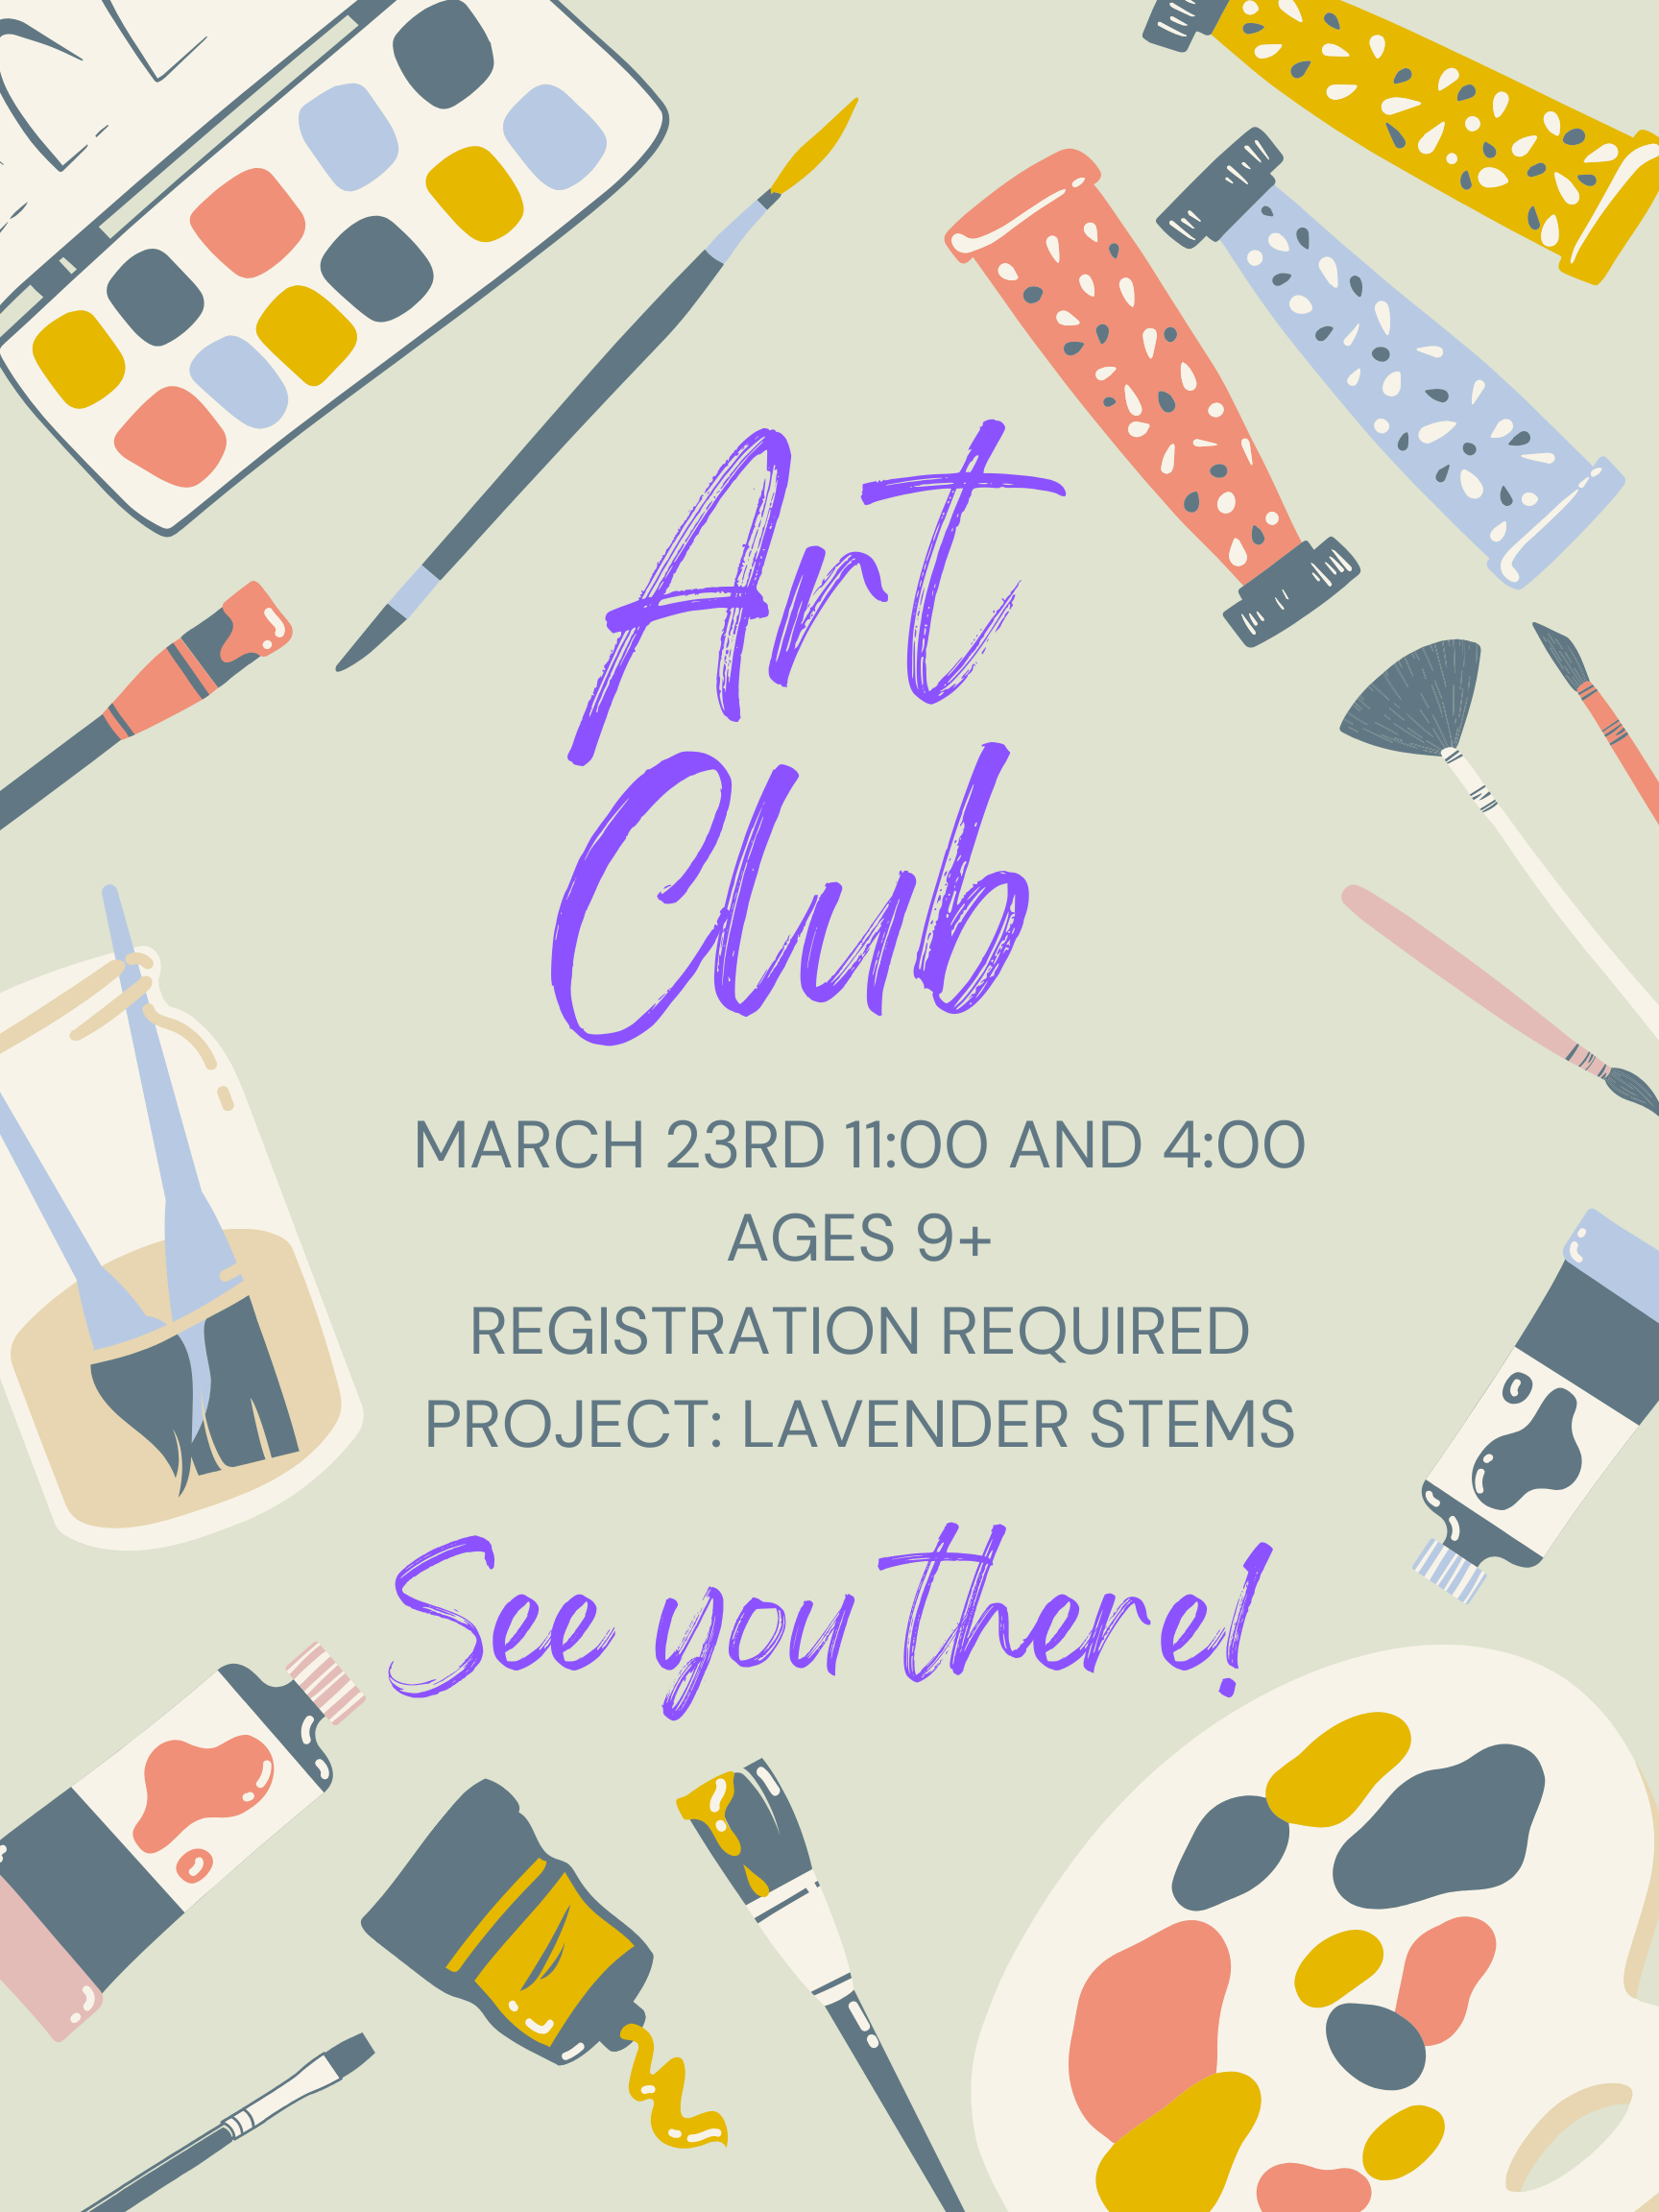 Art Club on March 23rd at 11am and 4pm for ages 9 and up. Project is Lavender Stems